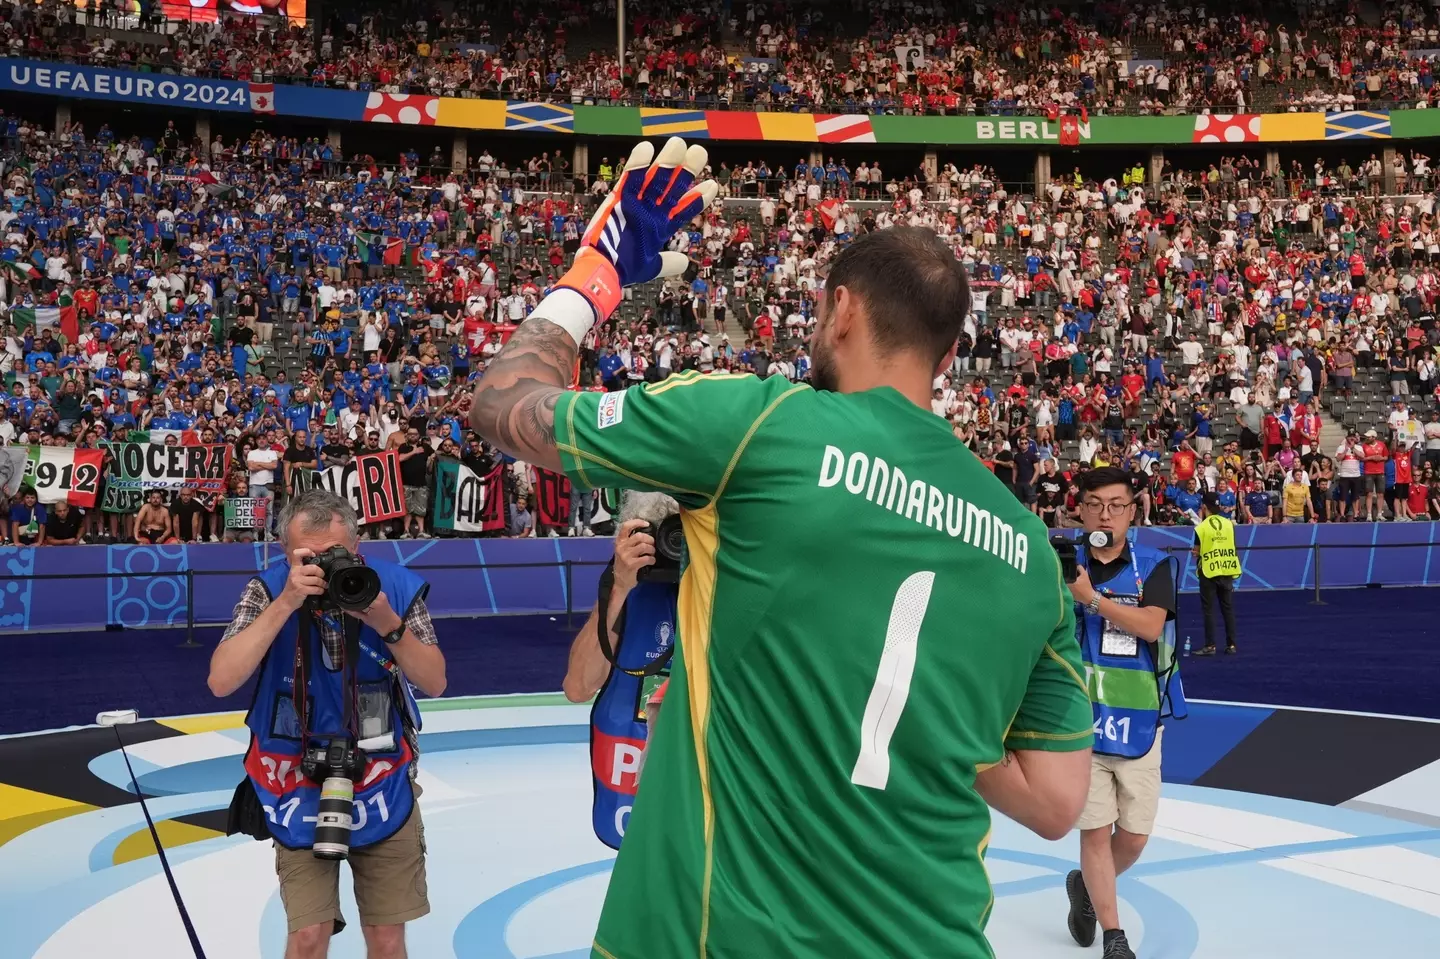 Gianluigi Donnarumma apologies to the Italy fans in attendance (Getty)